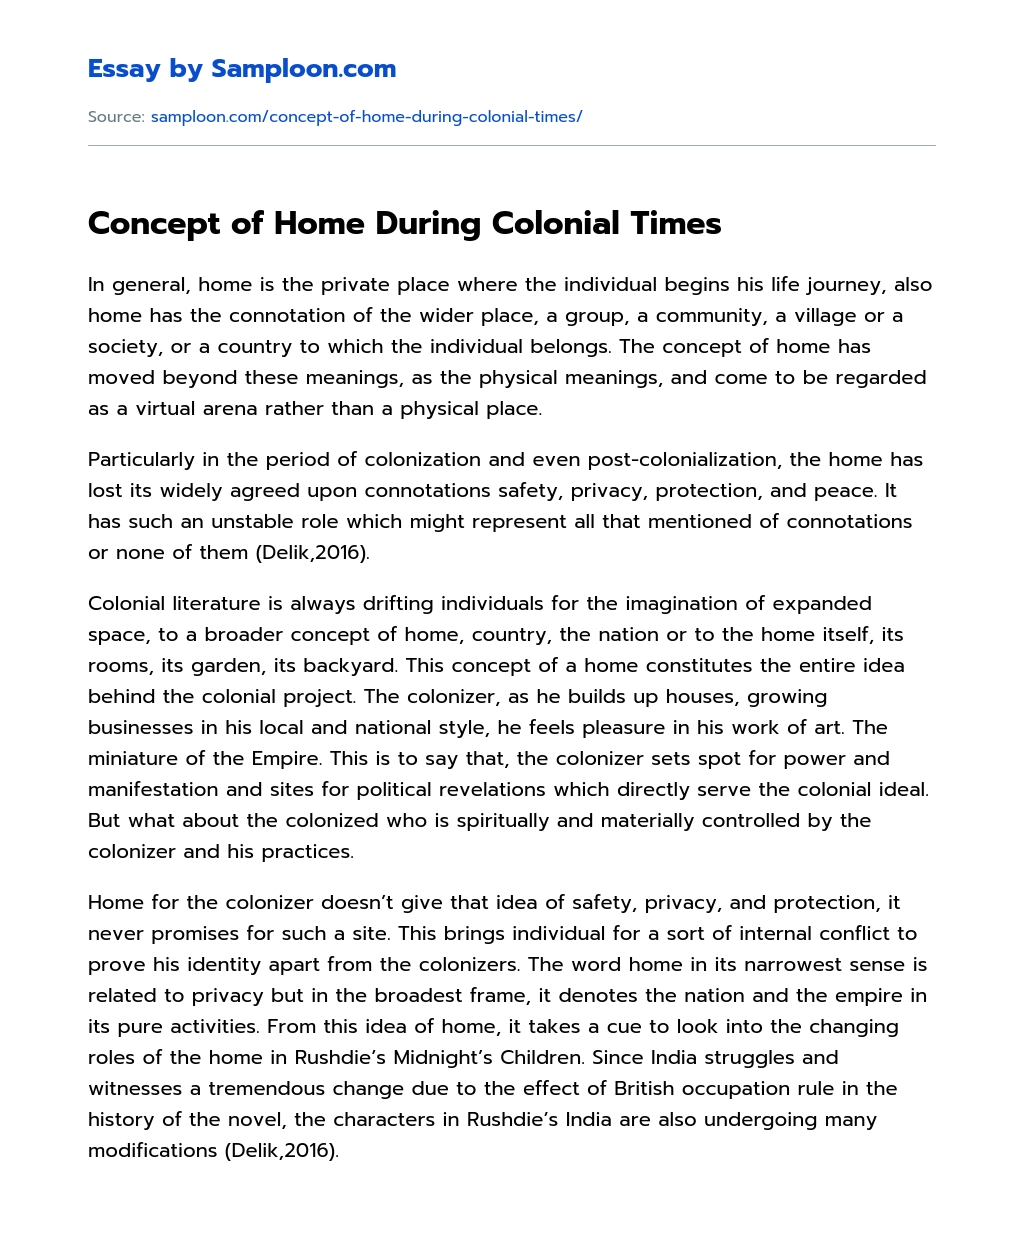 Concept of Home During Colonial Times essay